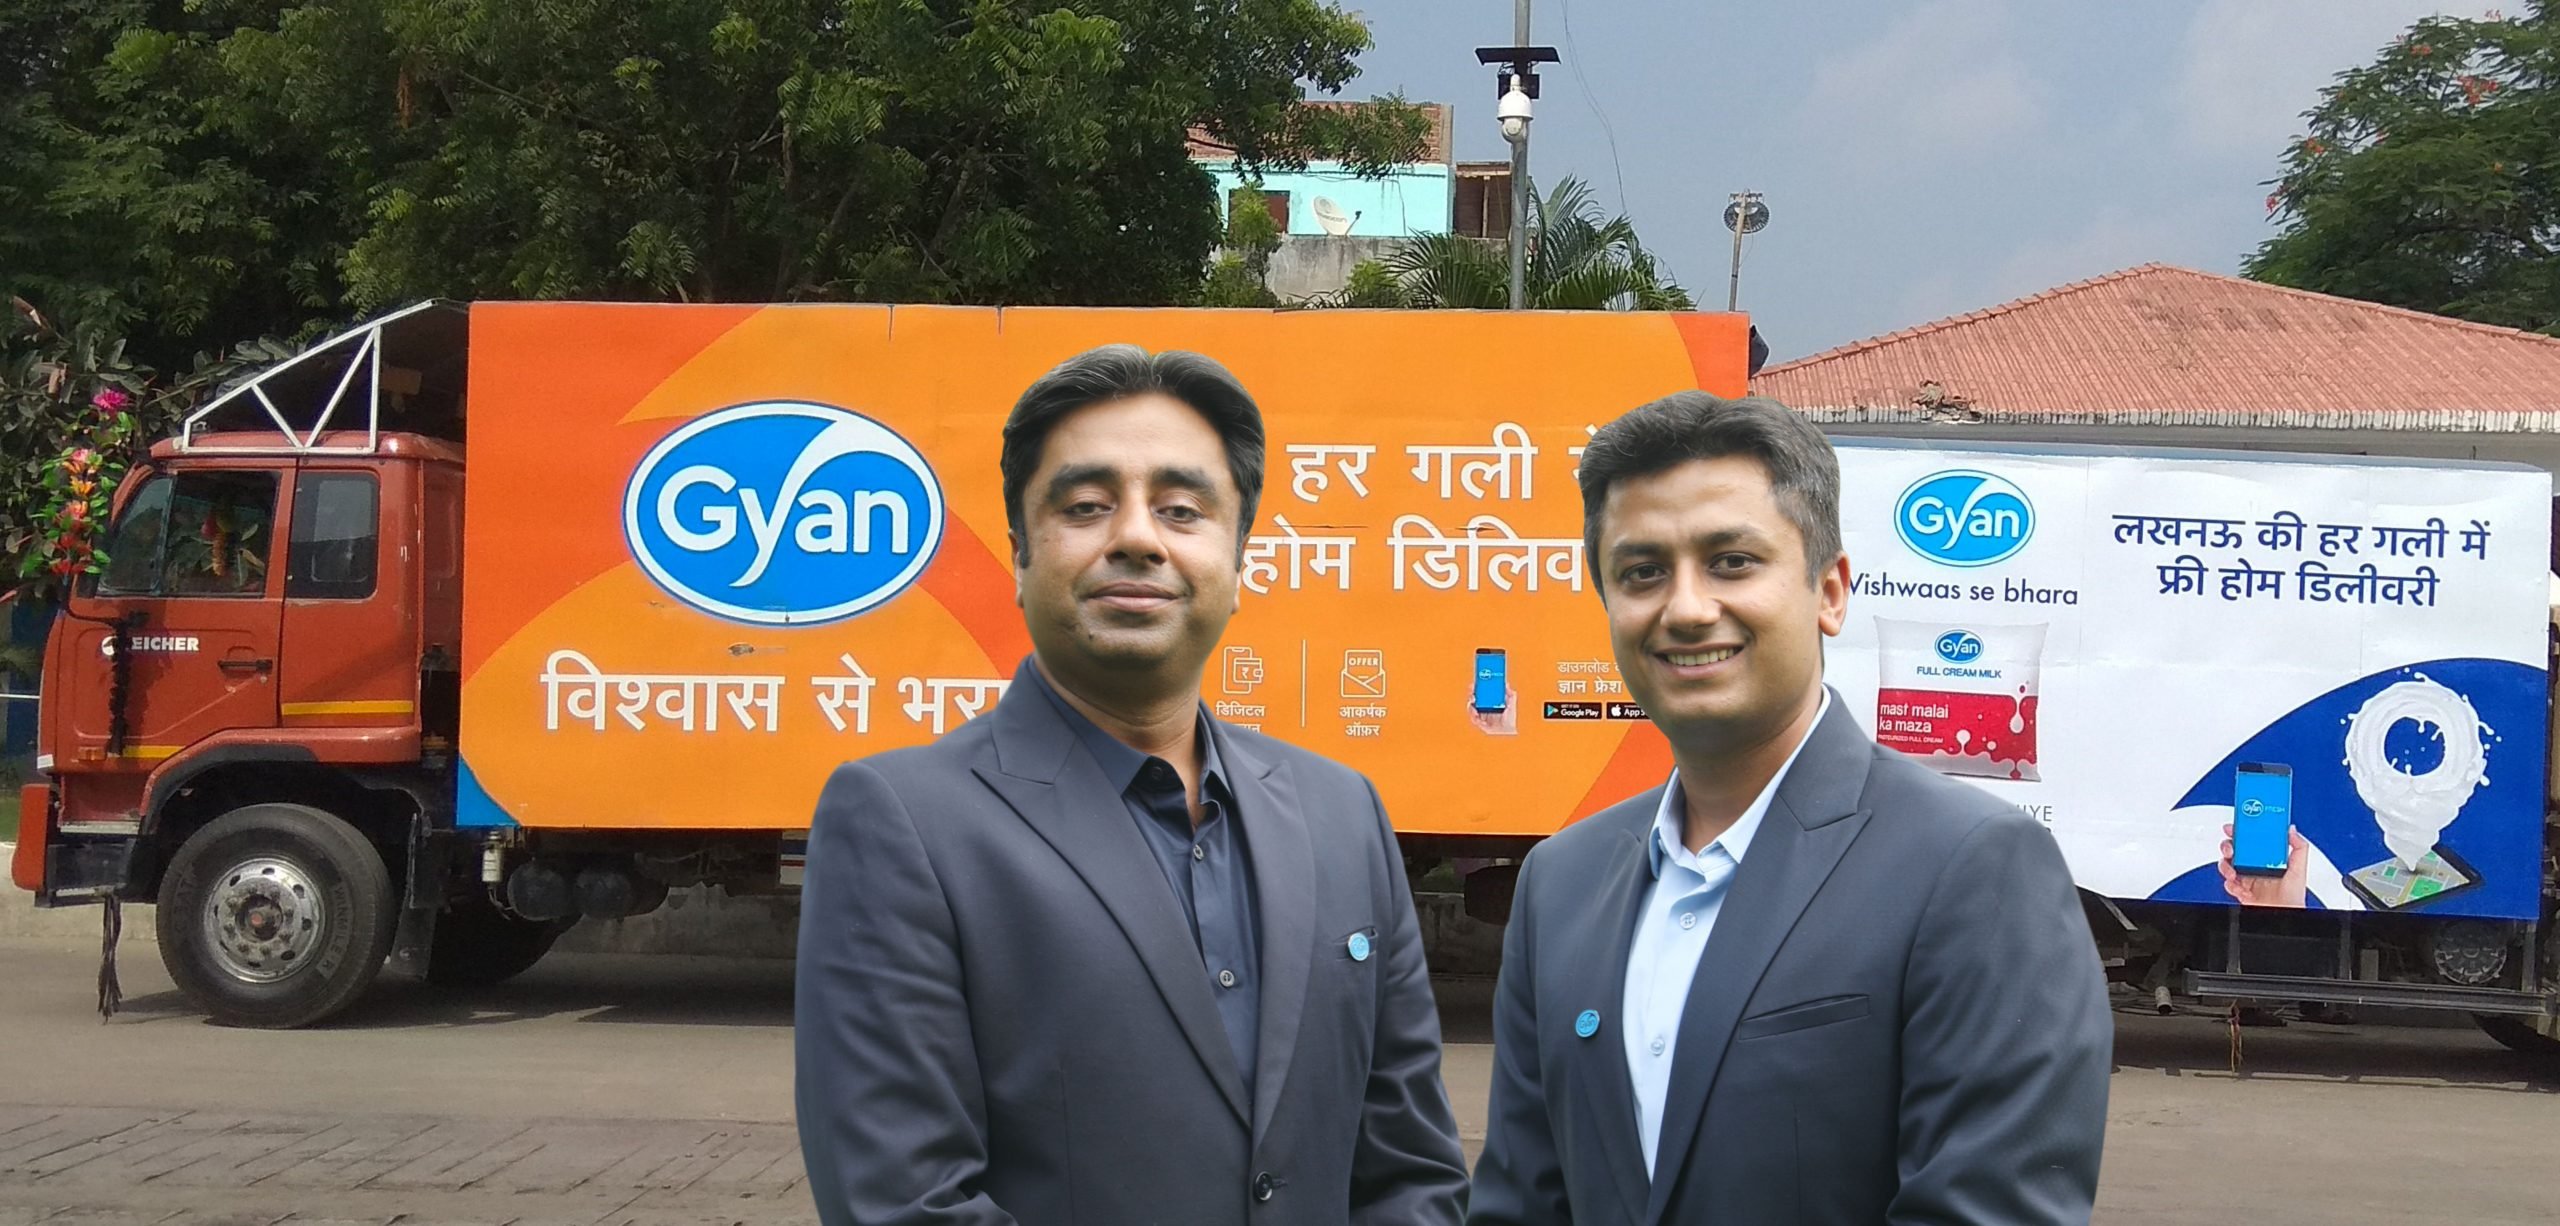 Gyan Dairy is disrupting dairy industry with its new-age technology and consumer centric approach